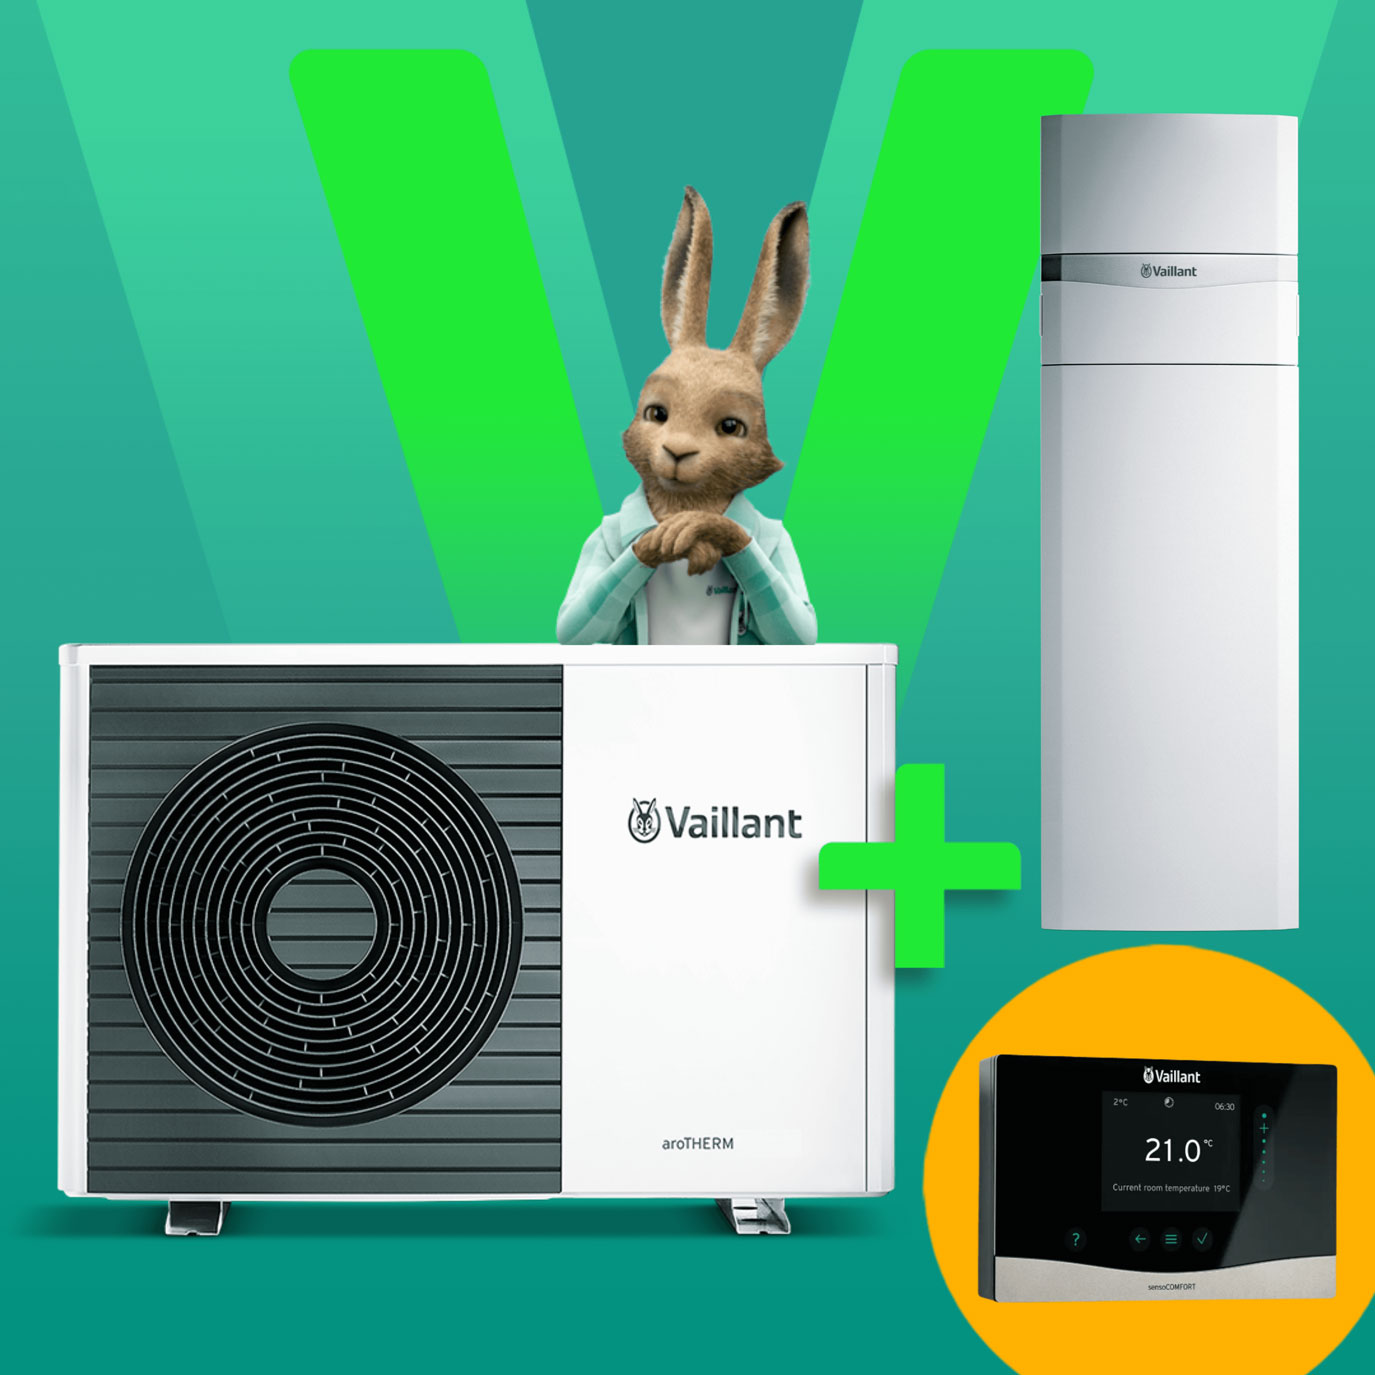 Hare with Vaillant products